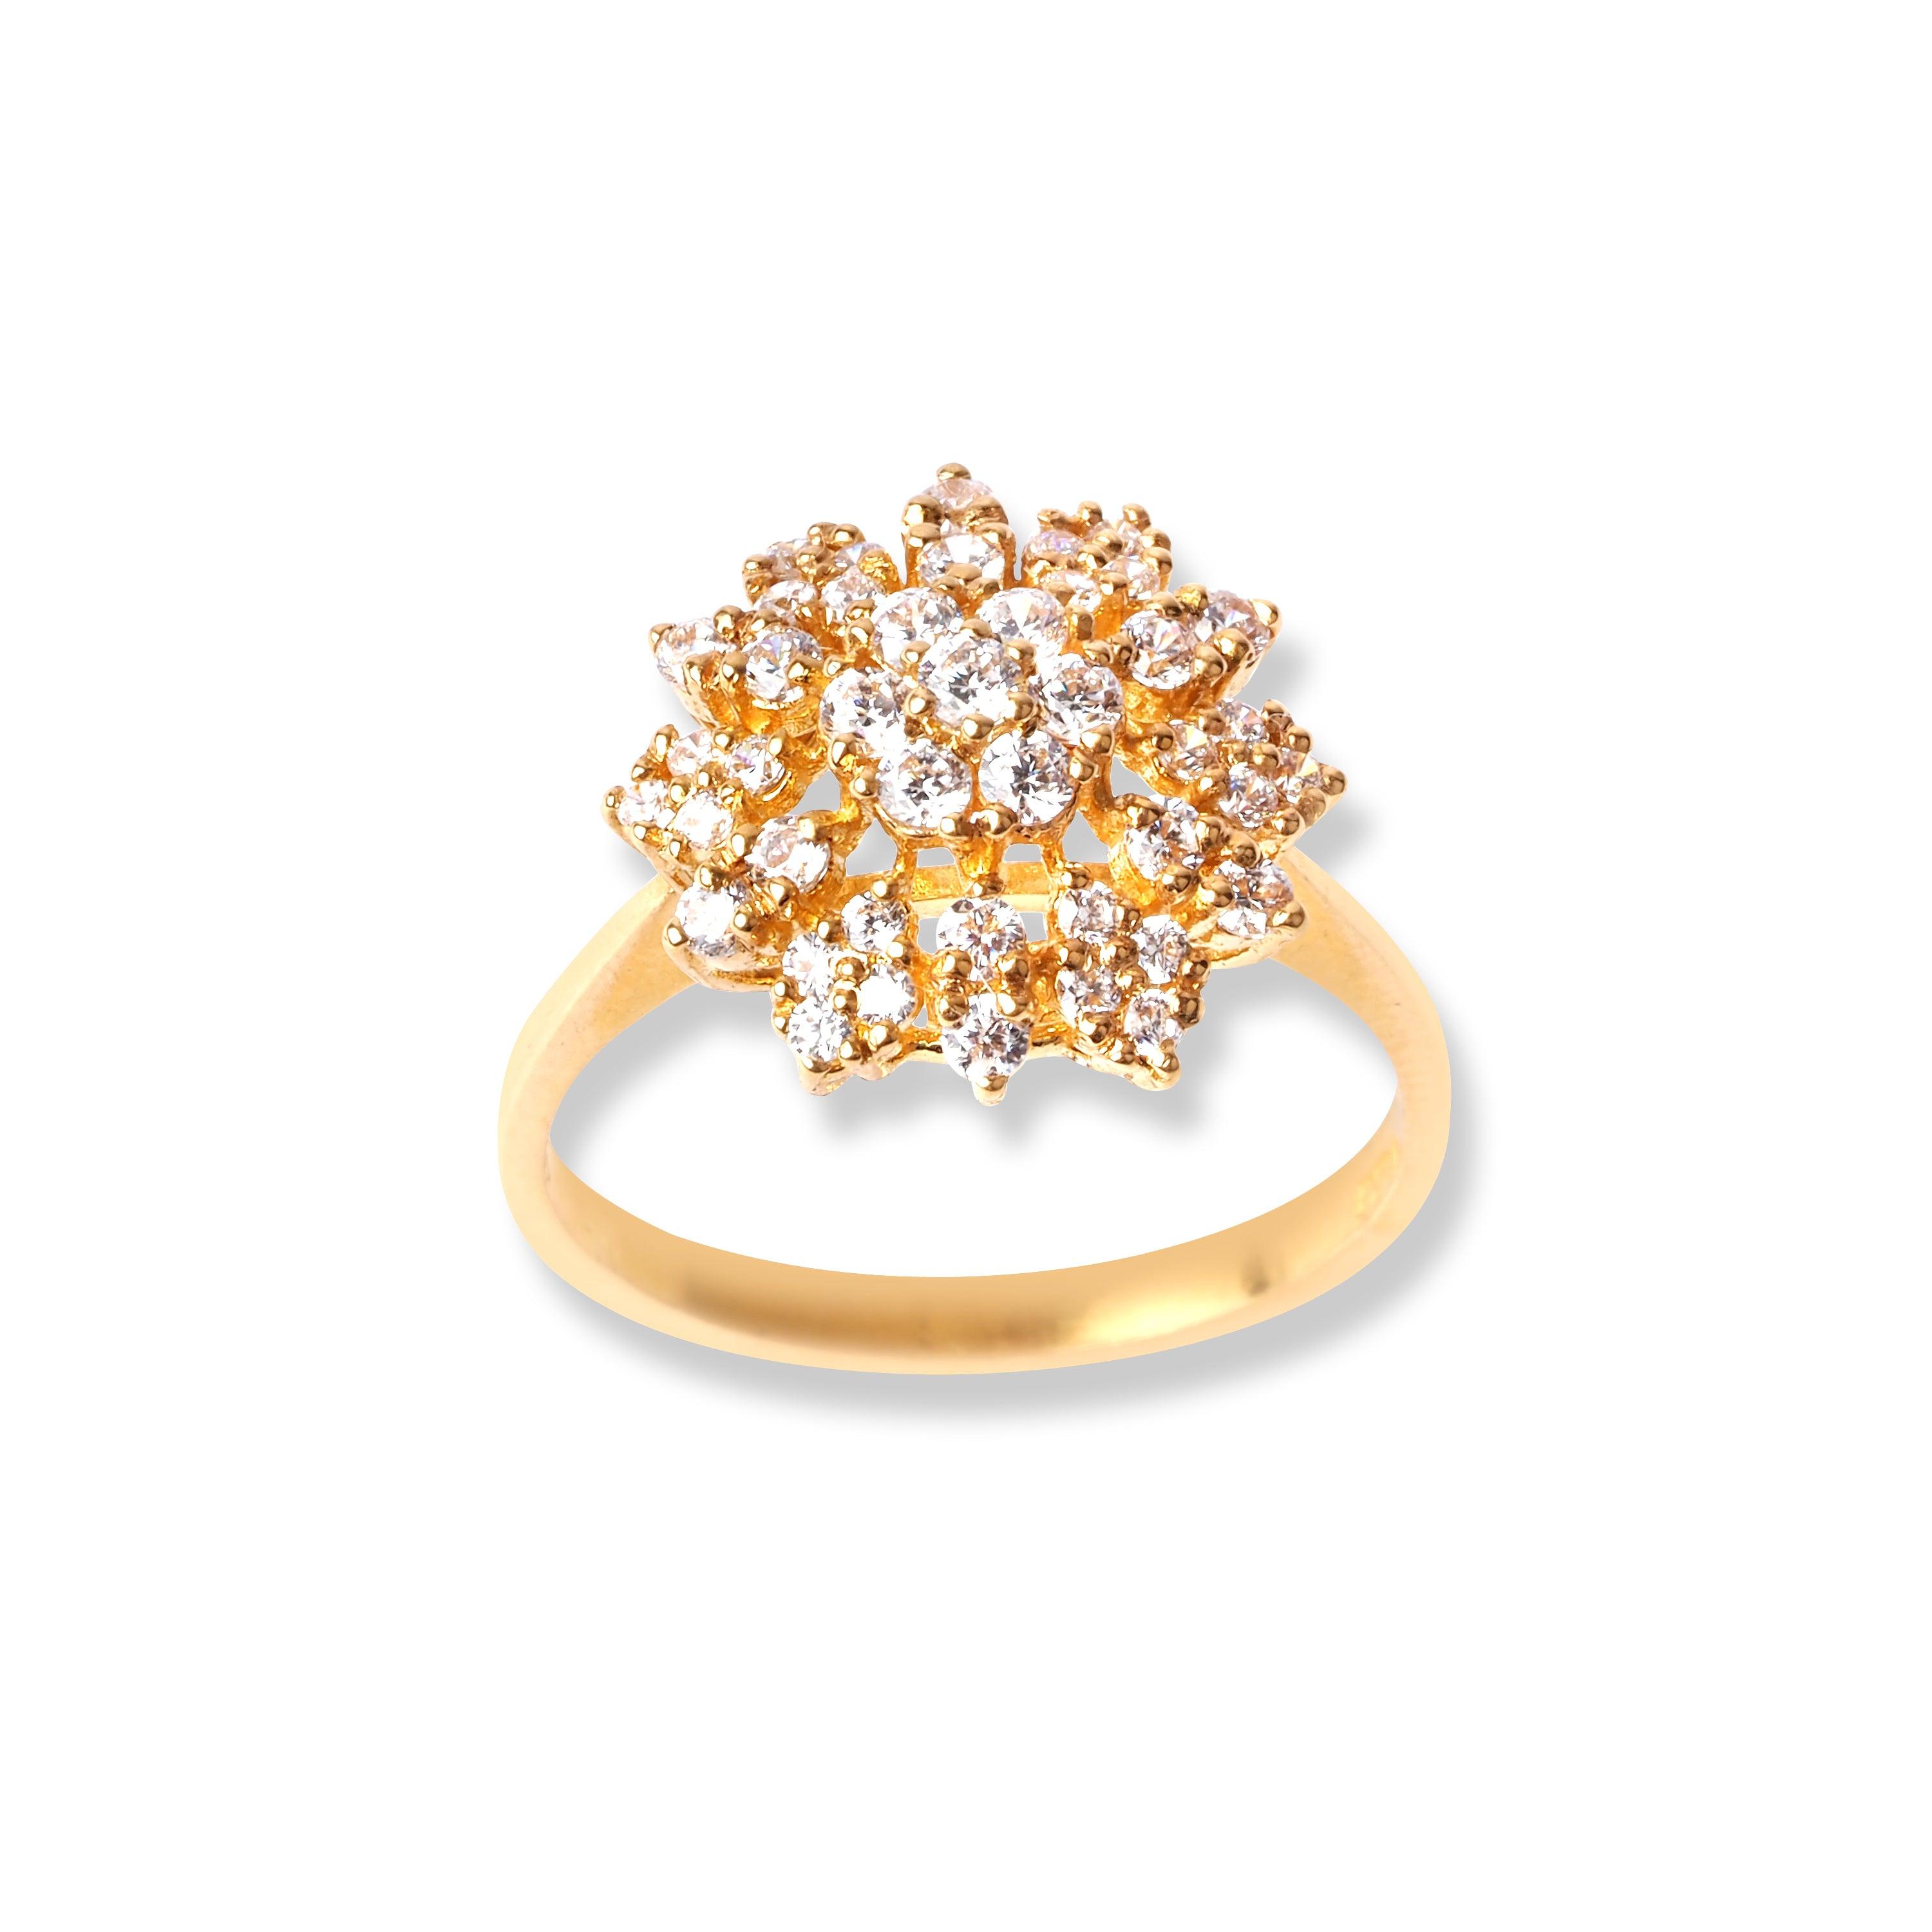 22ct Gold Ring With Cubic Zirconia Stones (3.6g) LR-6592 - Minar Jewellers